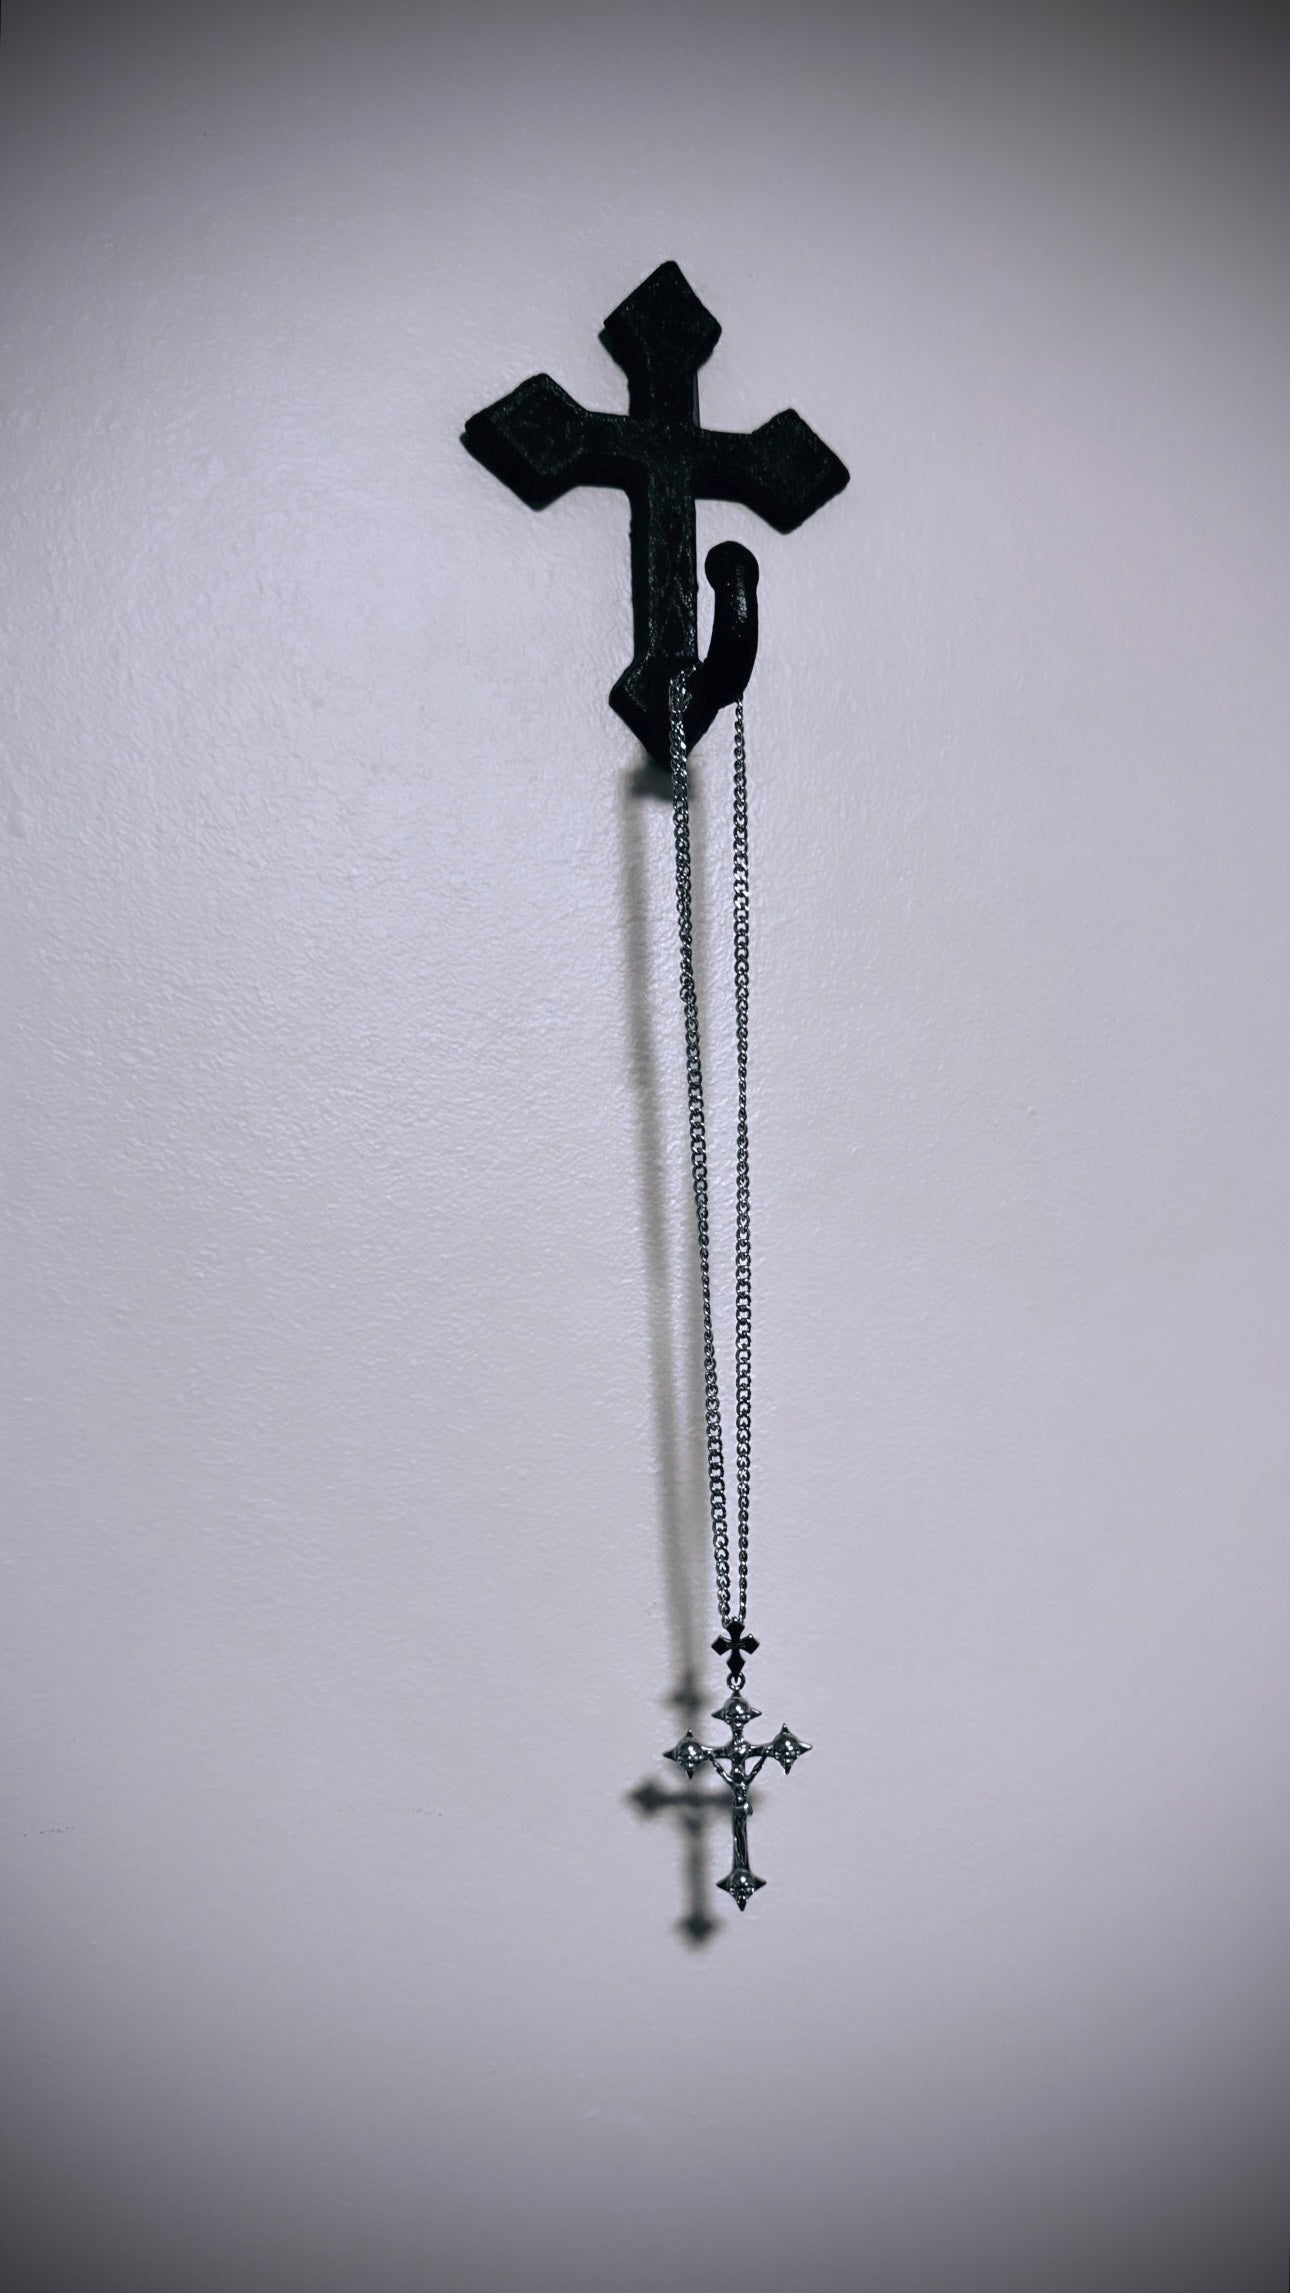 Crucifix necklace hanging